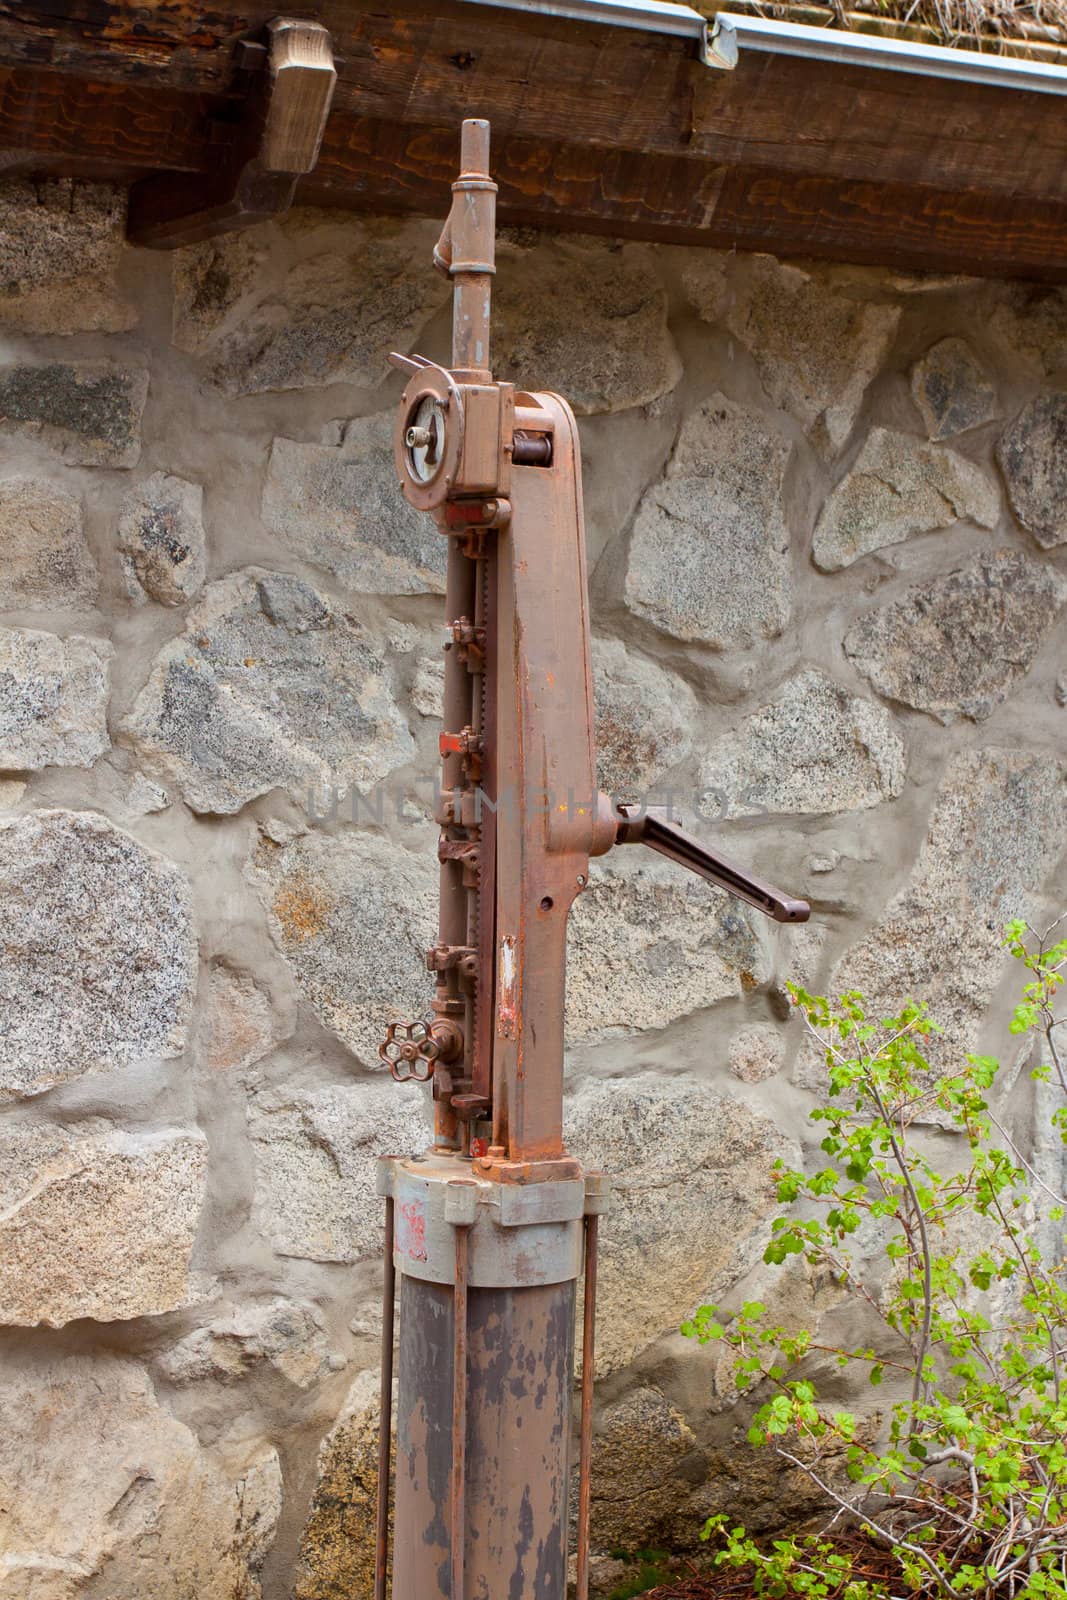 A pump for an old well is rusted and weathered outside a vintage home.